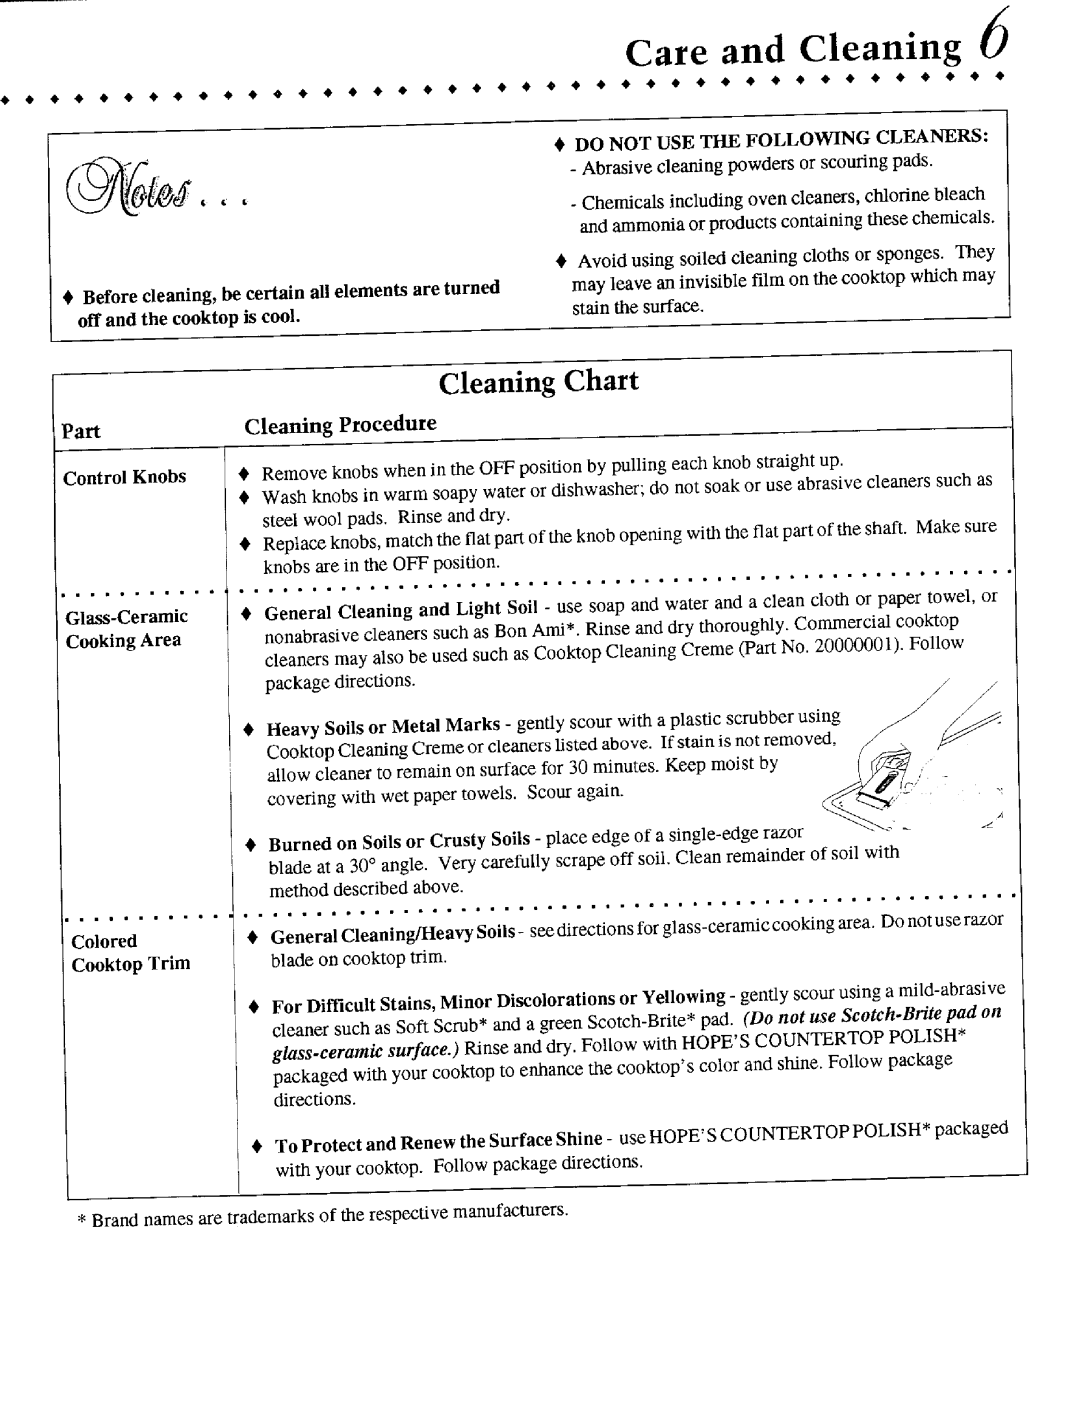 Jenn-Air CCE9100 Care and Cleaning, Part, Cleaning Procedure, Cleaning Chart, Do Not Use The Following Cleaners, Burned 